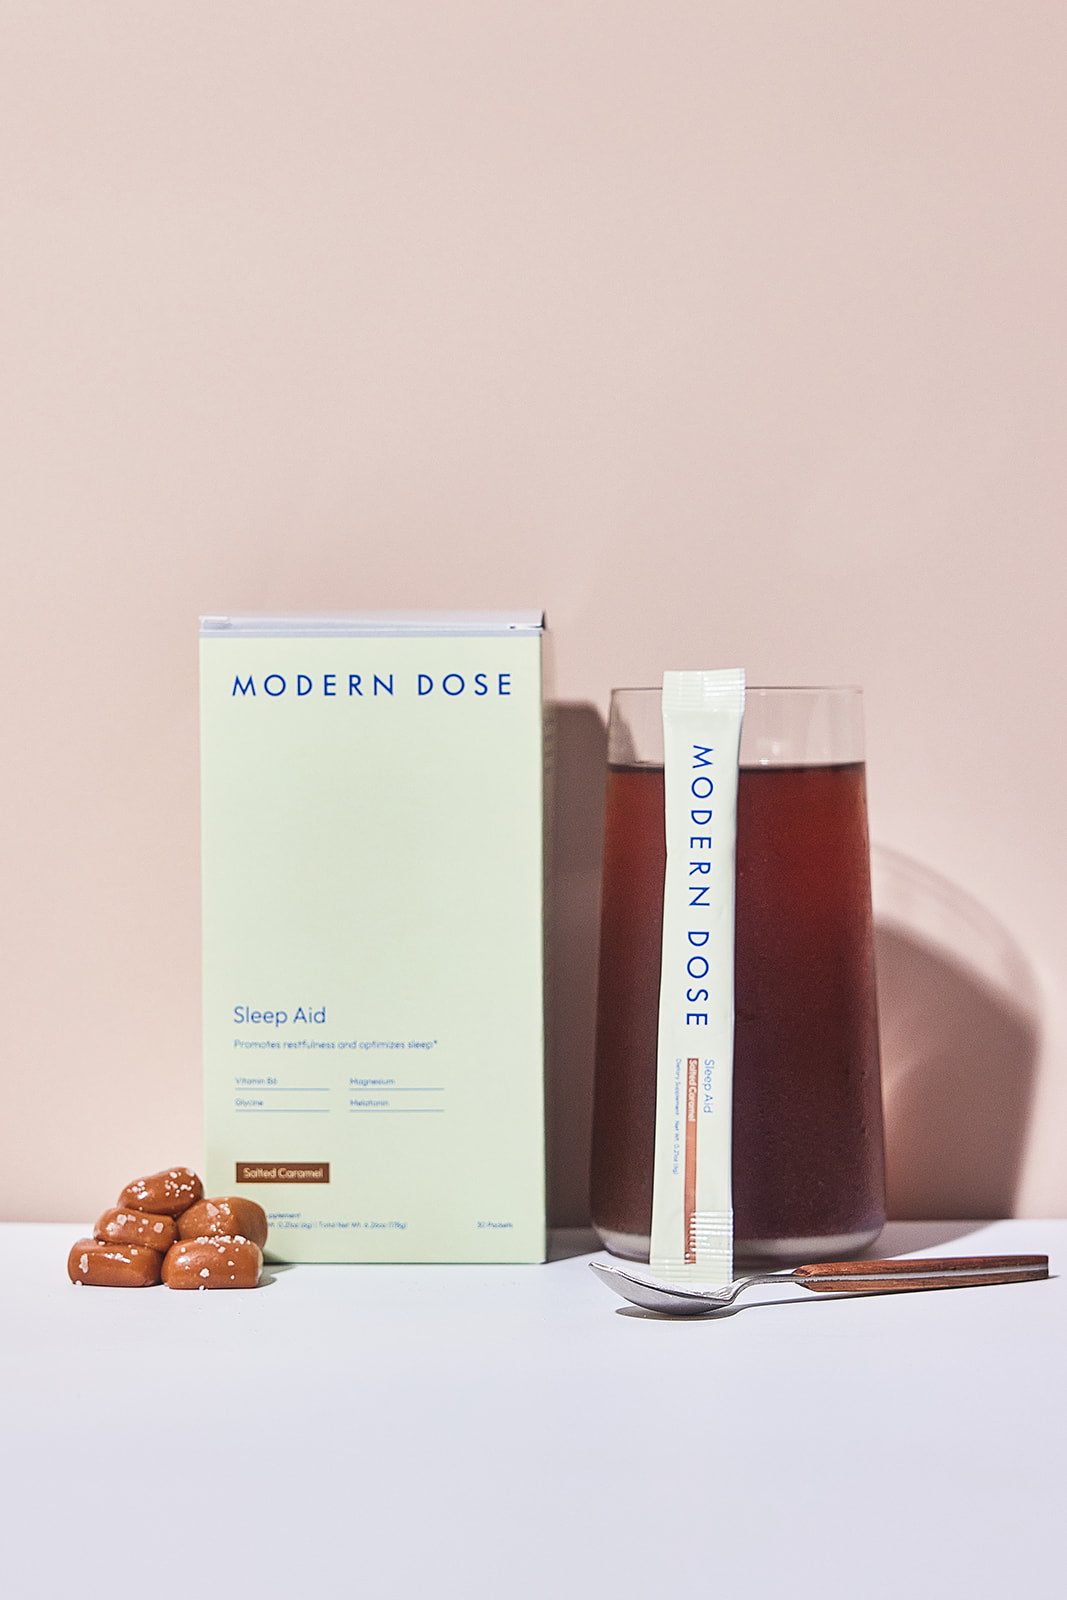 Modern Dose Sleep Aid Salted Caramel box, stick pack, and drink with salted caramel and a spoon